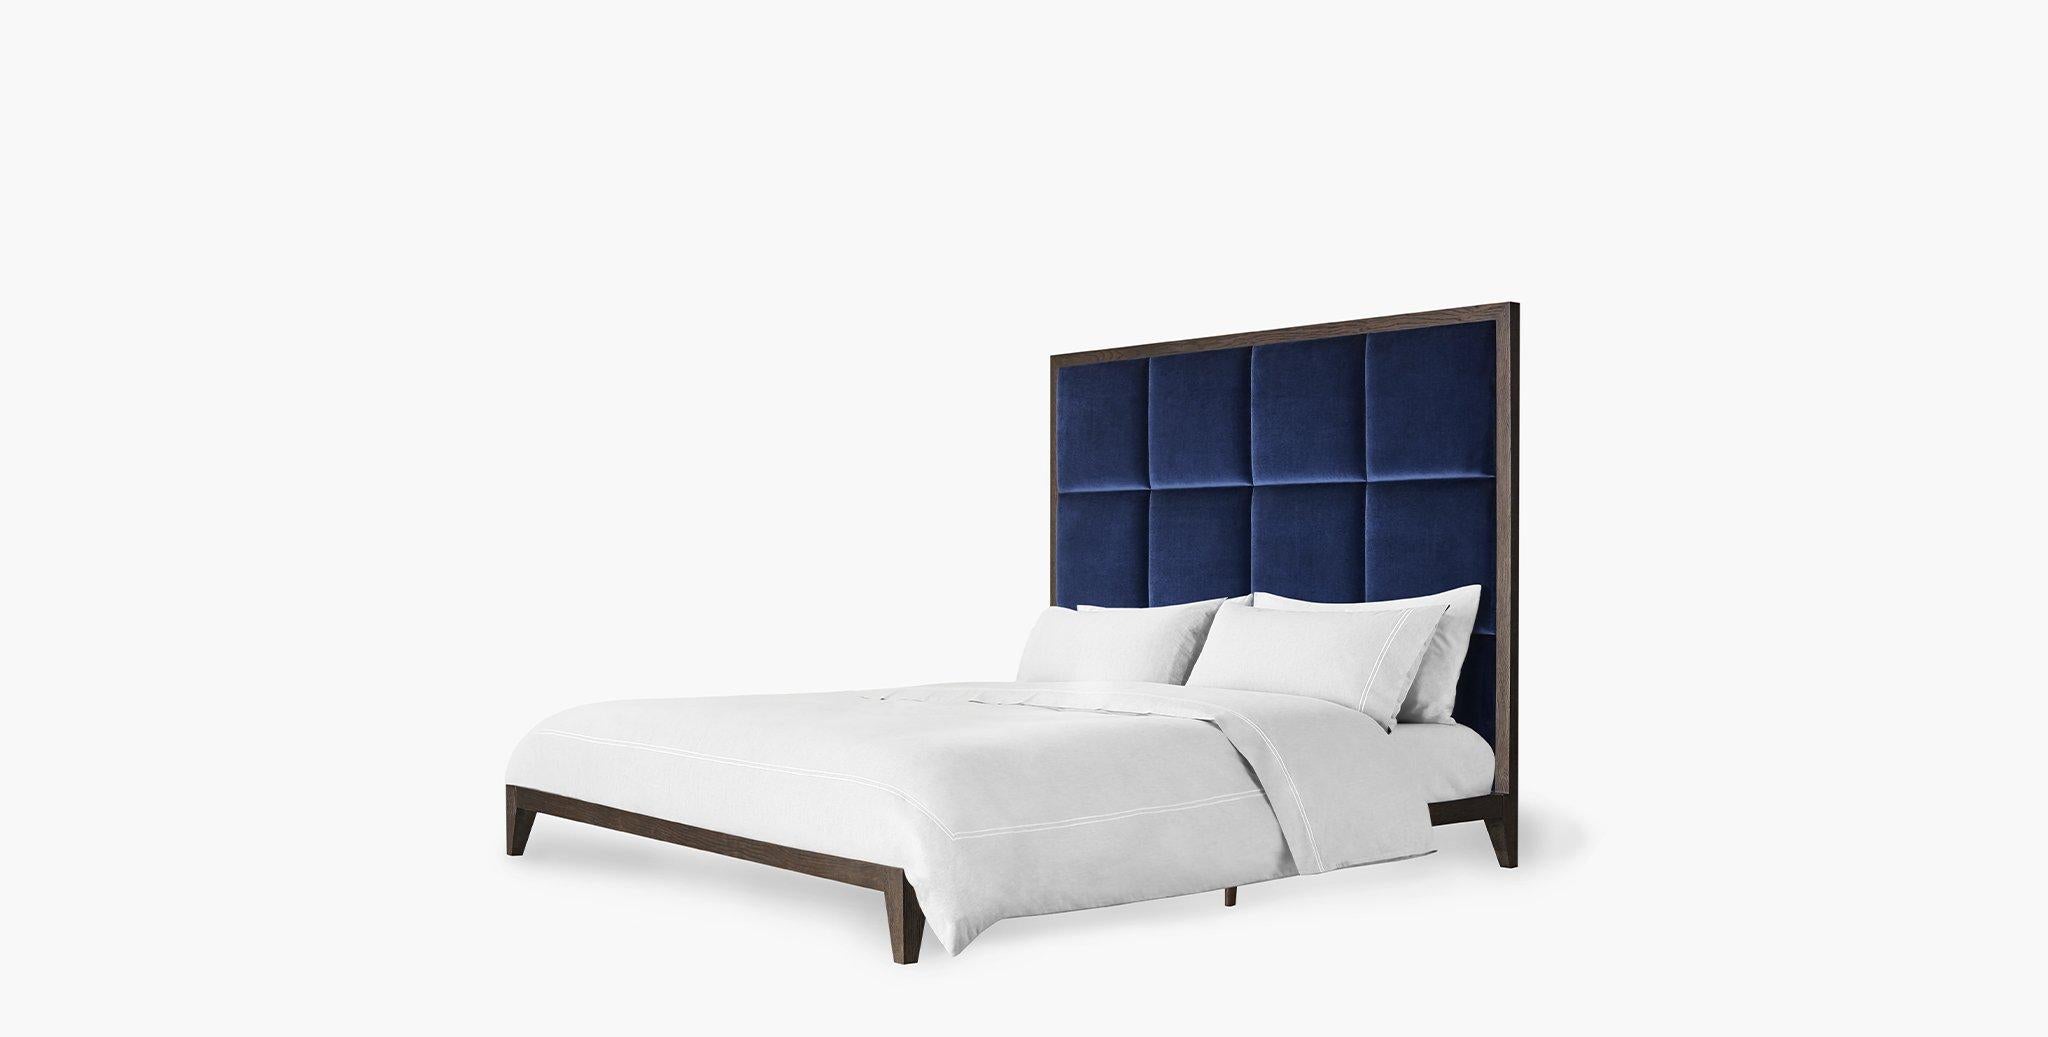 Exquisitely crafted with a tufted panel headboard perched on a dark walnut low-profile platform base, the Ridley bed is a refined anchor for a tailored retreat. Size: King. Upholstered with velvet Sapphire fabric.
 